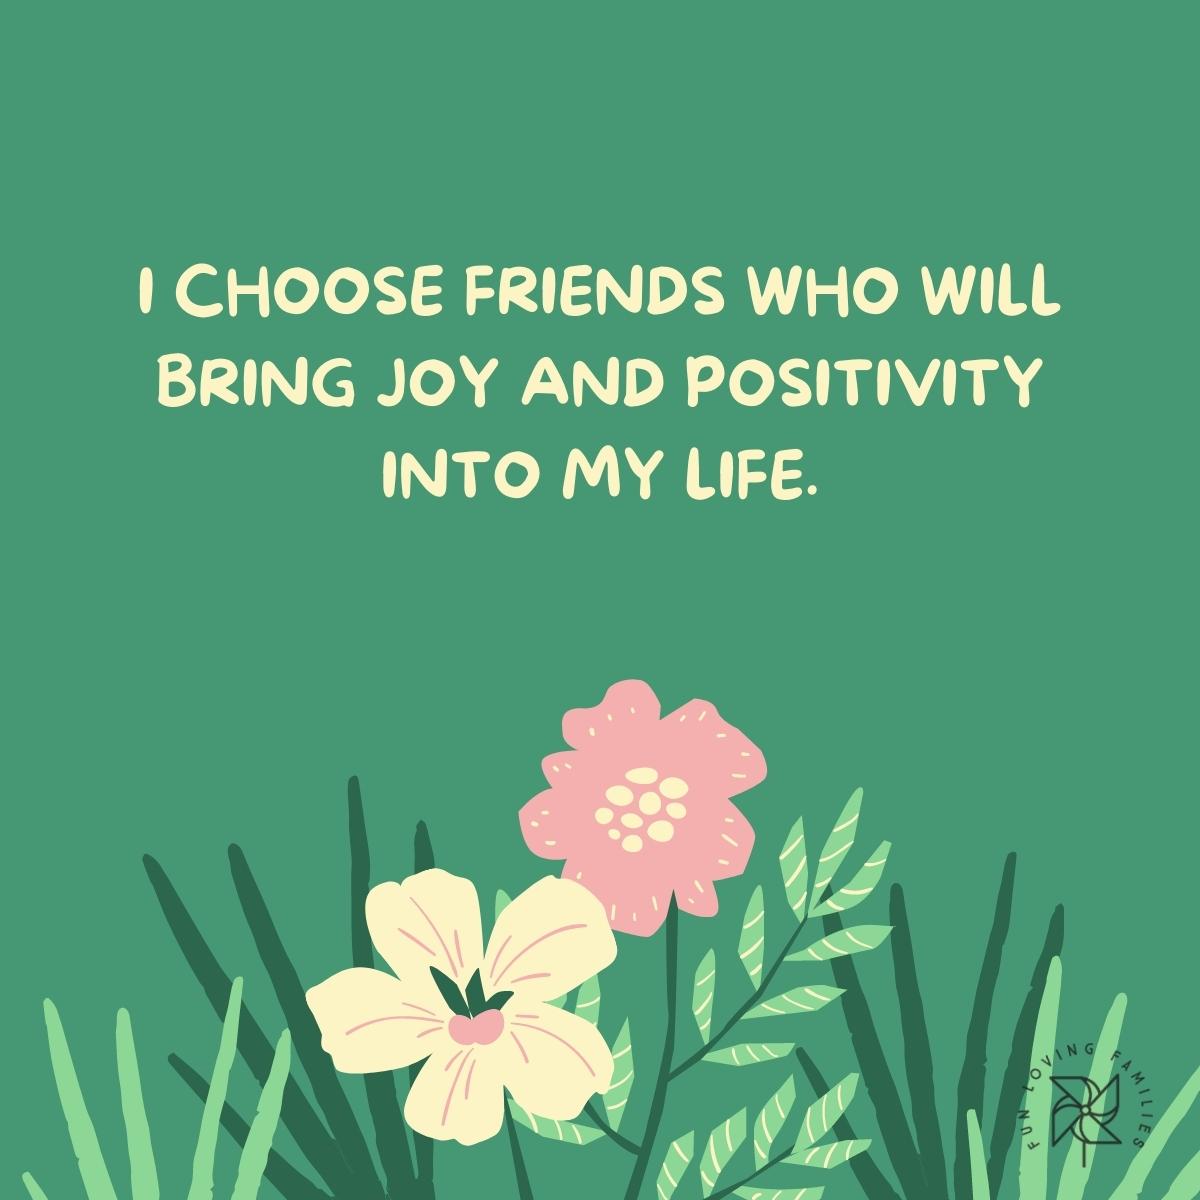 I choose friends who will bring joy and positivity into my life affirmation